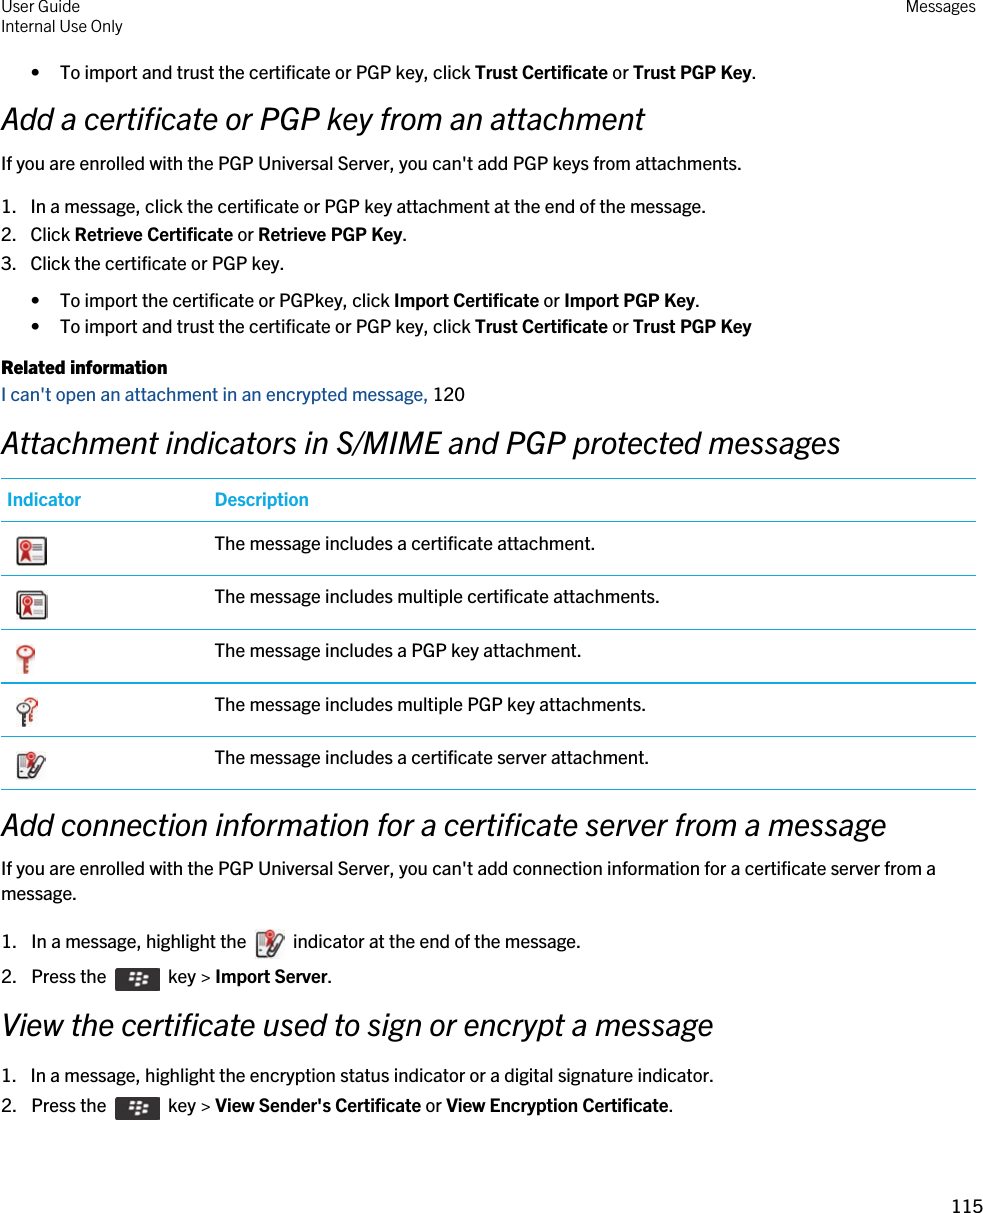 • To import and trust the certificate or PGP key, click Trust Certificate or Trust PGP Key.Add a certificate or PGP key from an attachmentIf you are enrolled with the PGP Universal Server, you can&apos;t add PGP keys from attachments.1. In a message, click the certificate or PGP key attachment at the end of the message.2. Click Retrieve Certificate or Retrieve PGP Key.3. Click the certificate or PGP key.• To import the certificate or PGPkey, click Import Certificate or Import PGP Key.• To import and trust the certificate or PGP key, click Trust Certificate or Trust PGP KeyRelated informationI can&apos;t open an attachment in an encrypted message, 120Attachment indicators in S/MIME and PGP protected messagesIndicator Description The message includes a certificate attachment. The message includes multiple certificate attachments. The message includes a PGP key attachment. The message includes multiple PGP key attachments. The message includes a certificate server attachment.Add connection information for a certificate server from a messageIf you are enrolled with the PGP Universal Server, you can&apos;t add connection information for a certificate server from a message.1.  In a message, highlight the    indicator at the end of the message. 2.  Press the    key &gt; Import Server. View the certificate used to sign or encrypt a message1. In a message, highlight the encryption status indicator or a digital signature indicator.2.  Press the    key &gt; View Sender&apos;s Certificate or View Encryption Certificate. User GuideInternal Use Only Messages115 